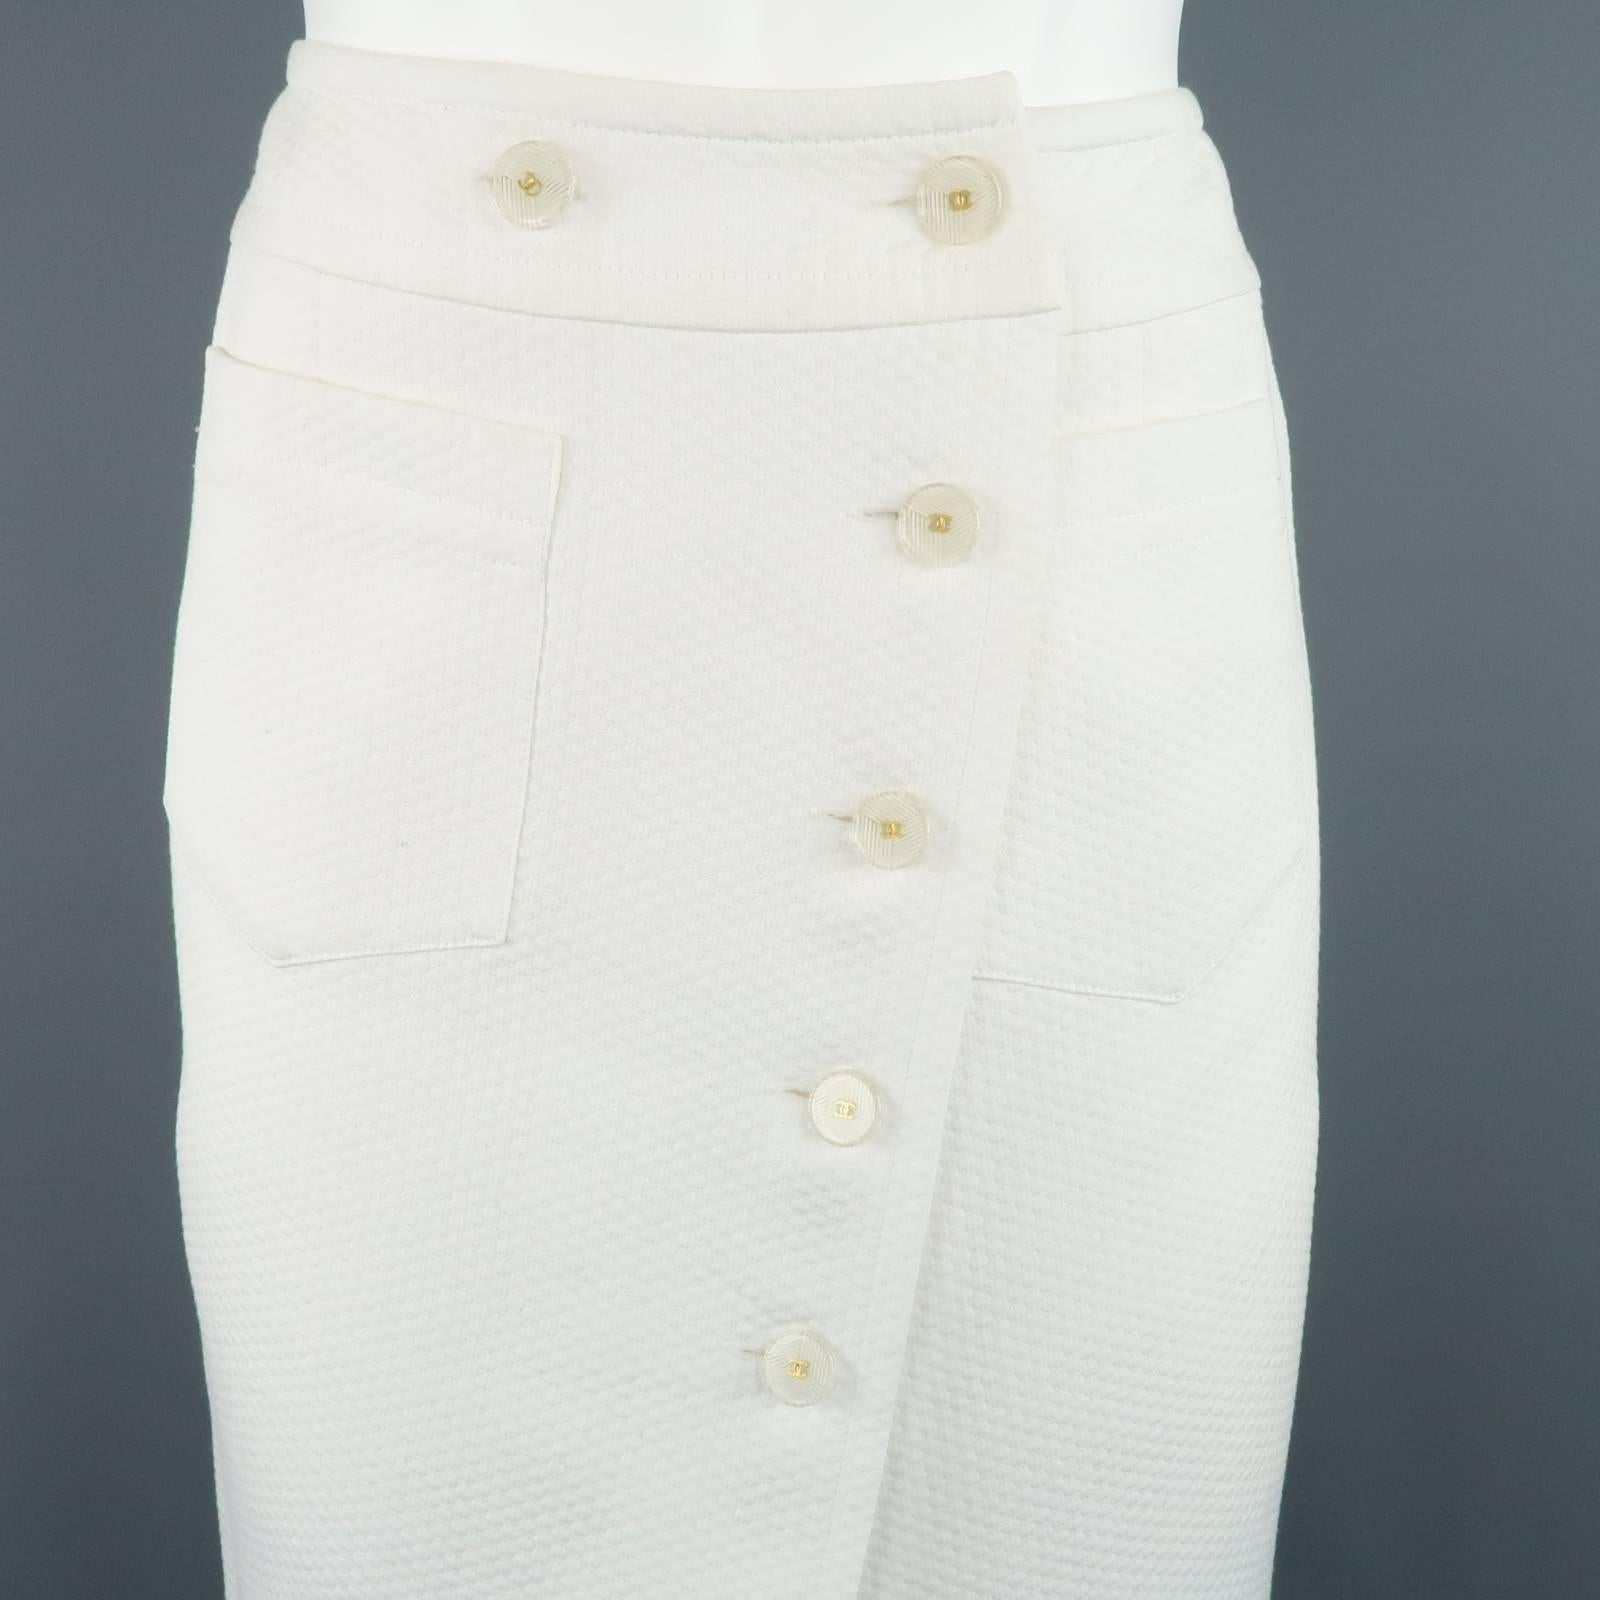 CHANEL A-line skirt comes in a white textured cotton fabric and features an asymmetrical wrap button closure with clear & gold tone CC buttons, patch pockets, and back slit. minor wear throughout. Made in France.
 
Good  Pre- Owned